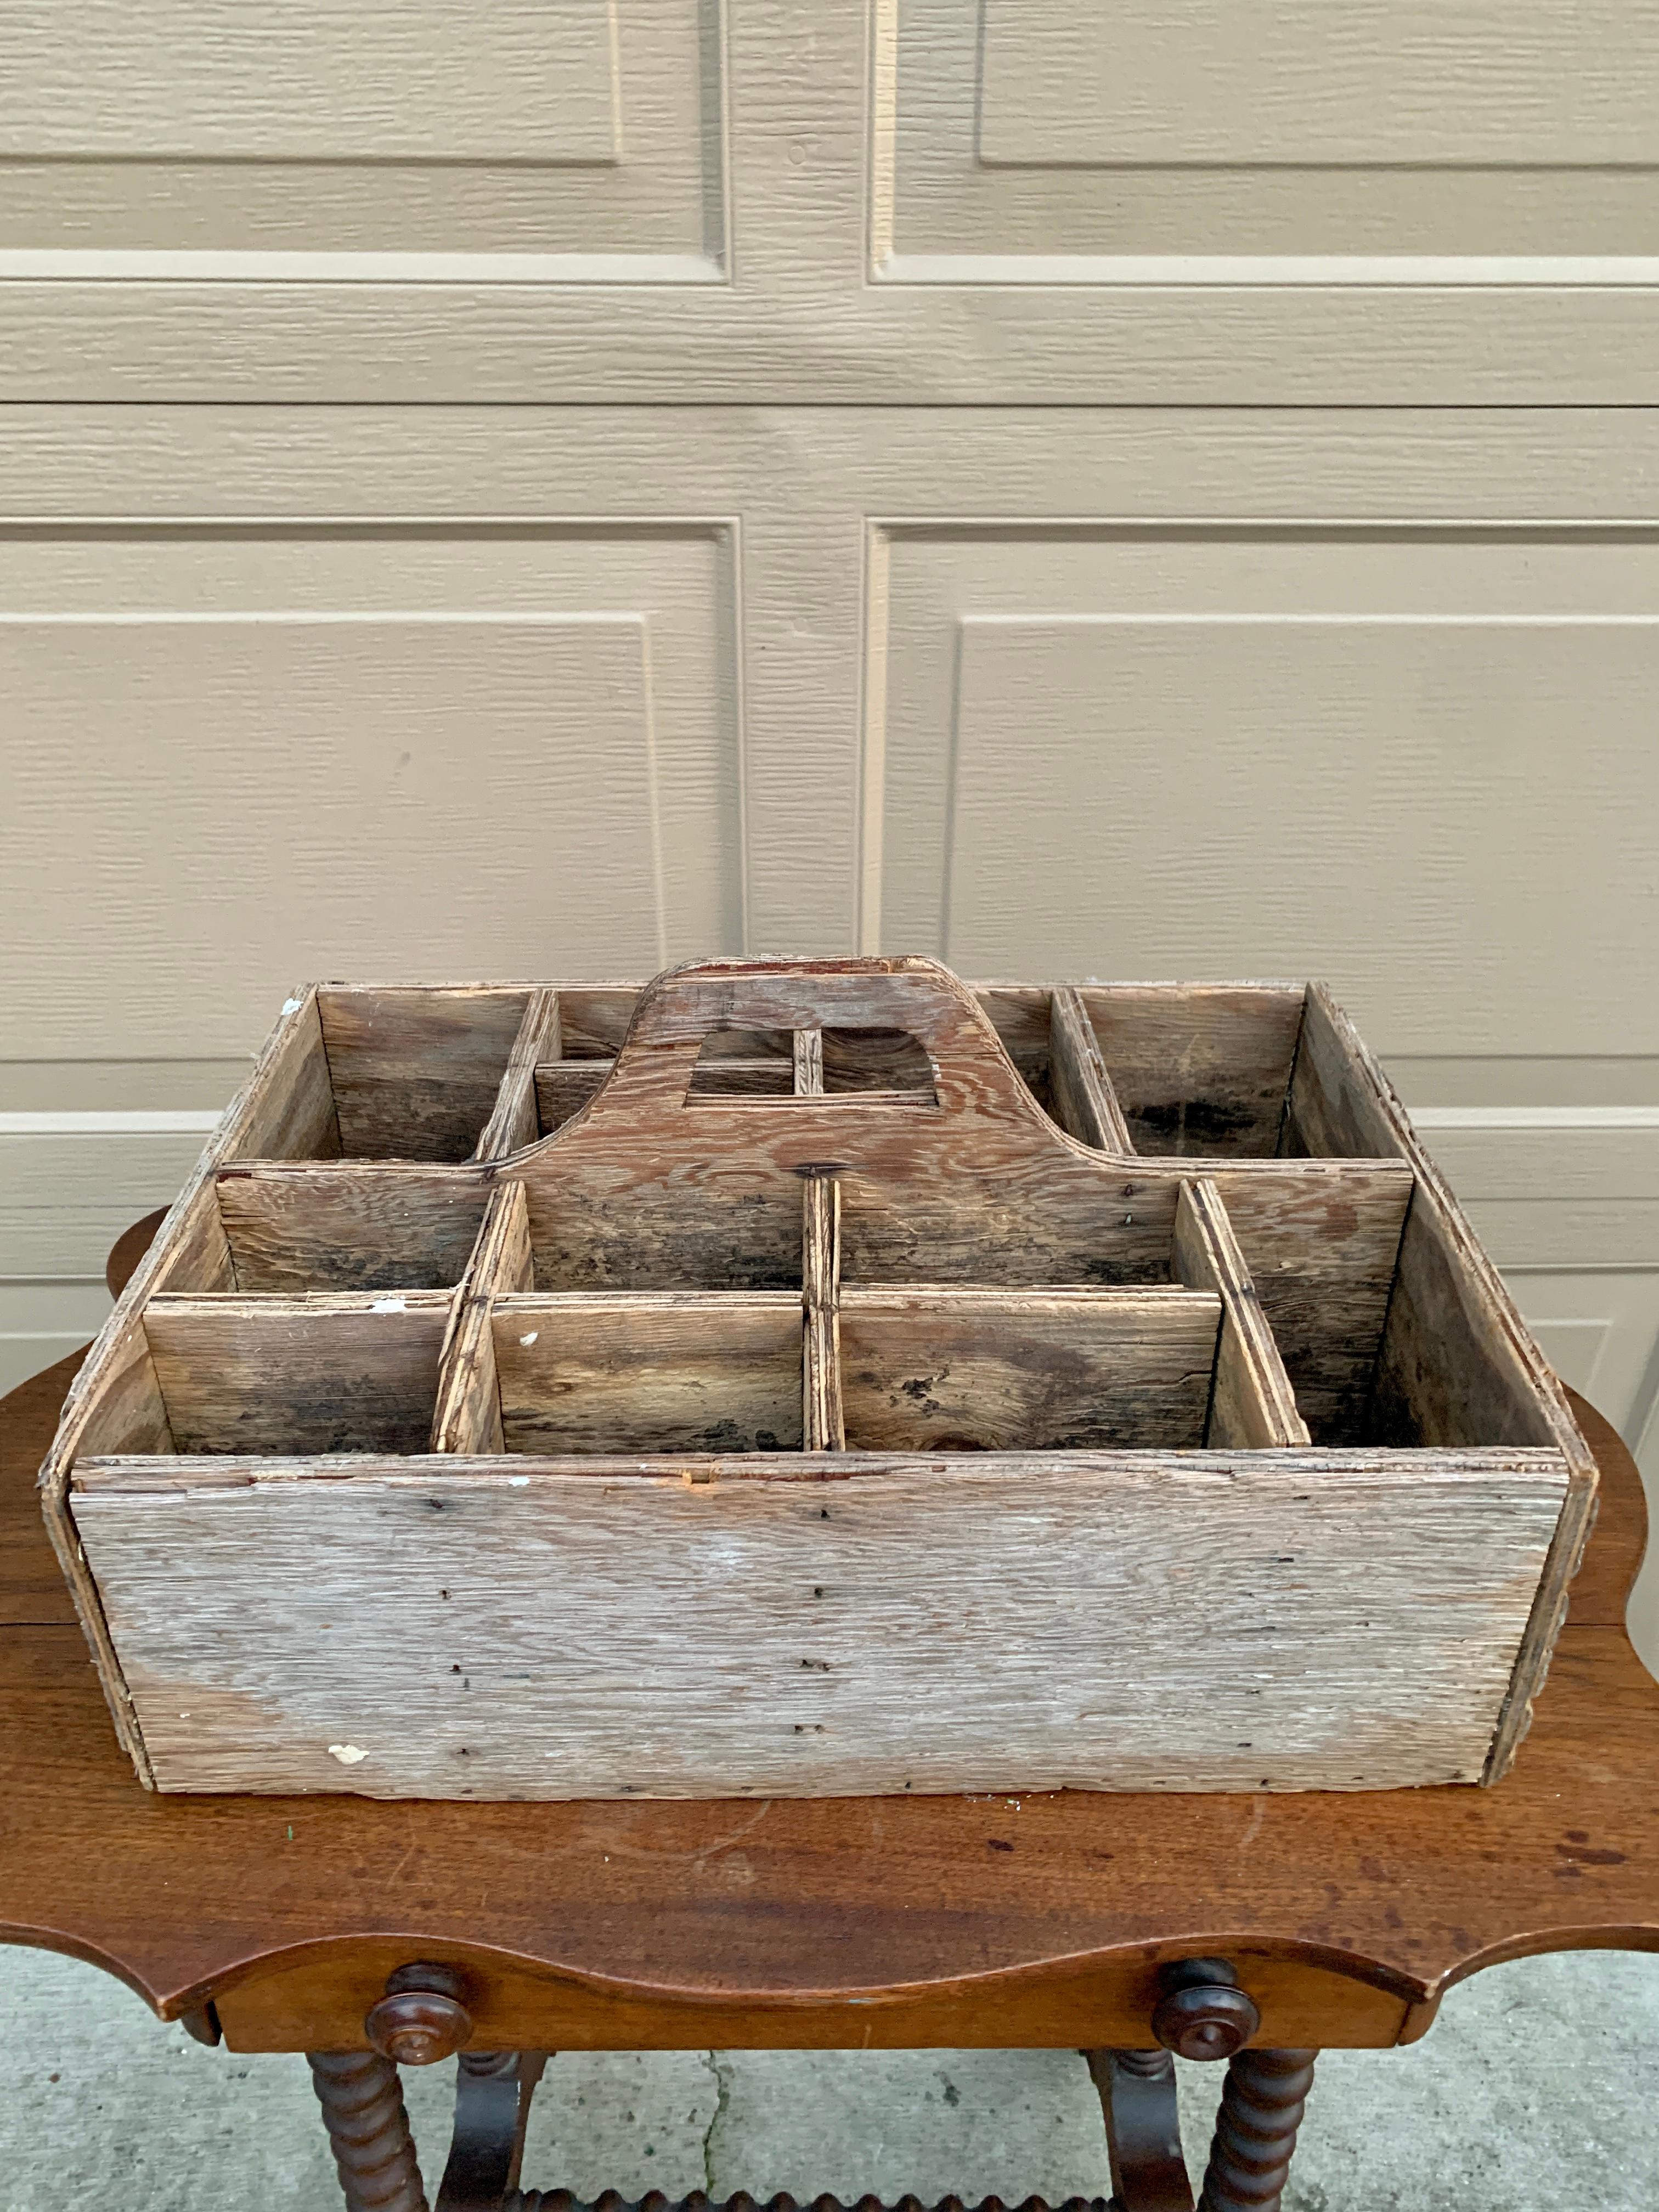 A charming country farmhouse wooden tool box trug. This piece would be ideal as a craft organizer, silverware holder, or garden tool box.

USA, Early 20th Century

Measures: 19